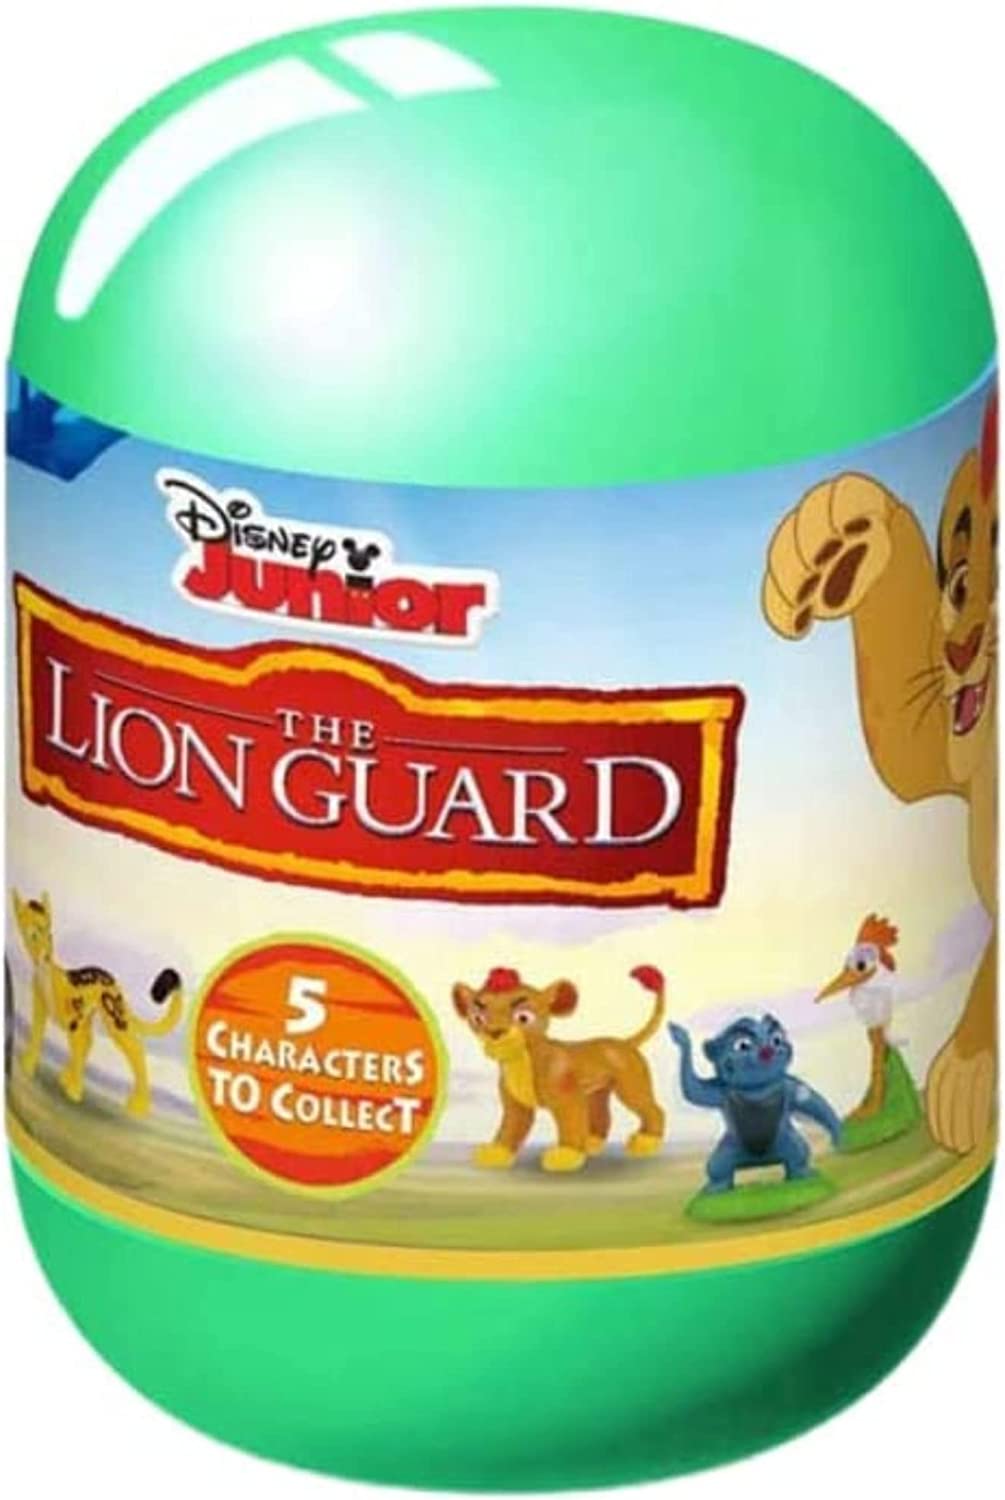 The Lion Guard - 2" 5cm Mini Figures - 5 to Collect - Guaranteed Complete Set - Pack of 8 - Toptoys2u